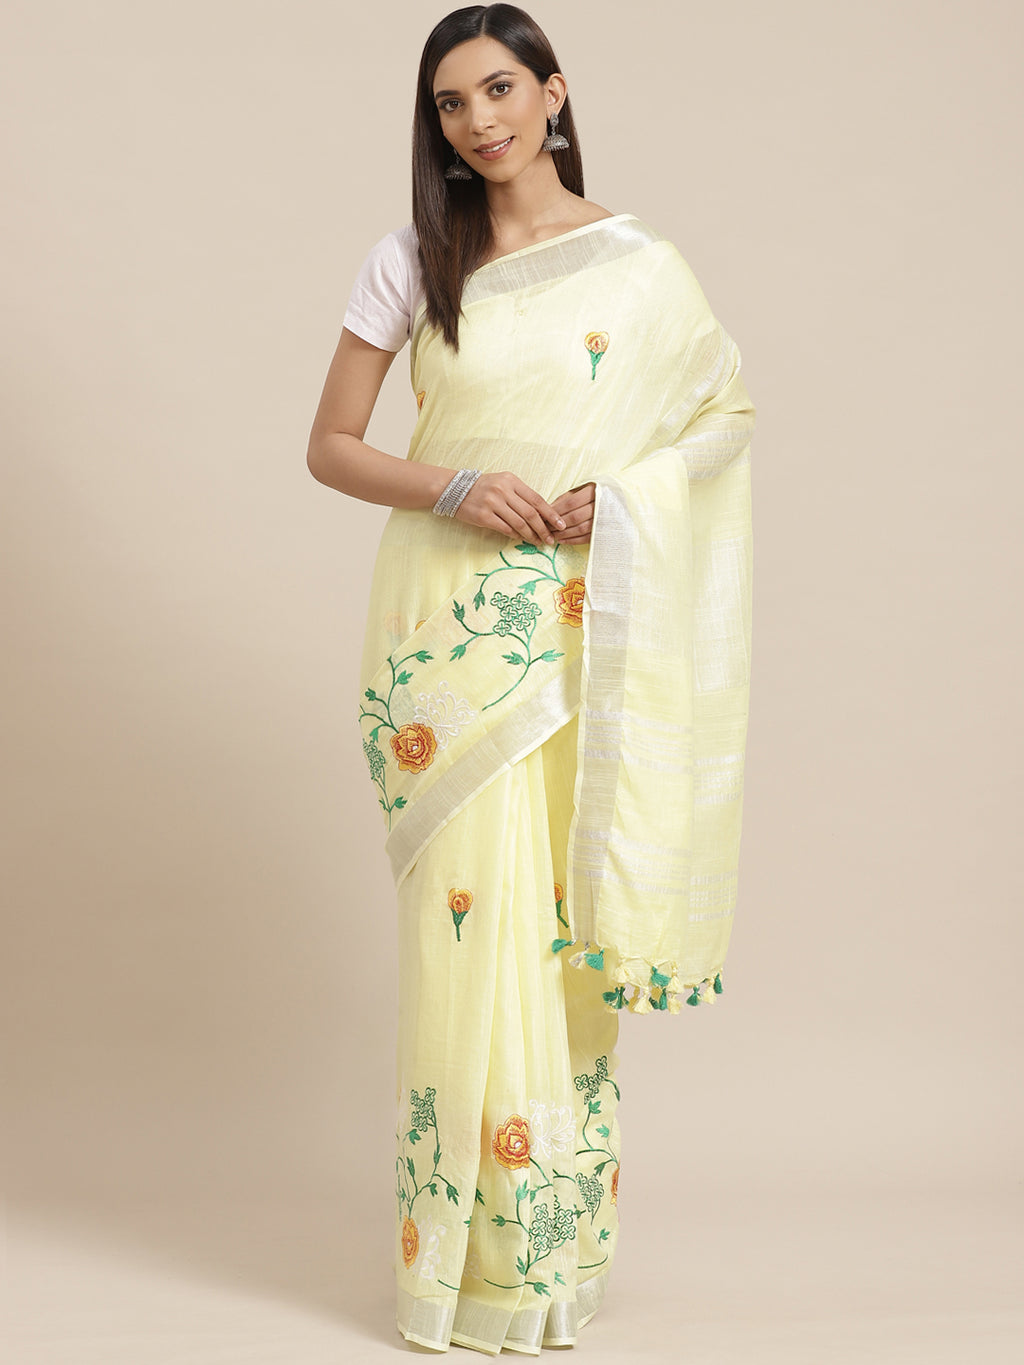 Yellow and Green, Kalakari India Linen Woven Saree and Blouse ALBGSA0053-Saree-Kalakari India-ALBGSA0053-Cotton, Geographical Indication, Hand Crafted, Heritage Prints, Linen, Natural Dyes, Red, Sarees, Shibori, Sustainable Fabrics, Woven, Yellow-[Linen,Ethnic,wear,Fashionista,Handloom,Handicraft,Indigo,blockprint,block,print,Cotton,Chanderi,Blue, latest,classy,party,bollywood,trendy,summer,style,traditional,formal,elegant,unique,style,hand,block,print, dabu,booti,gift,present,glamorous,affordab